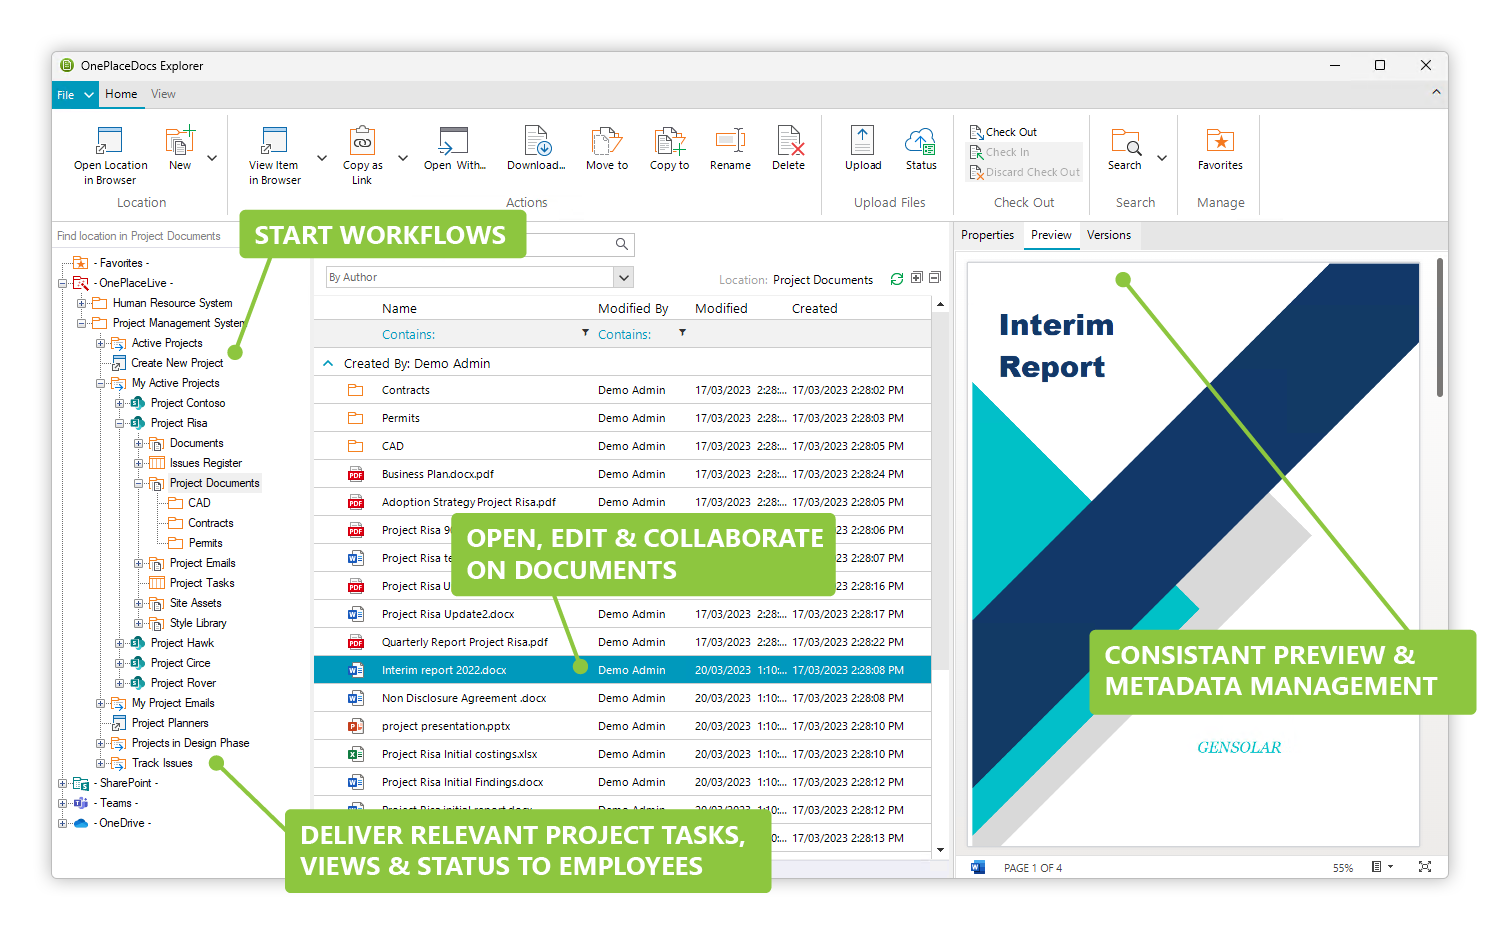 OnePlaceDocs Explorer enriches Microsoft 365 SharePoint Project Management Solution